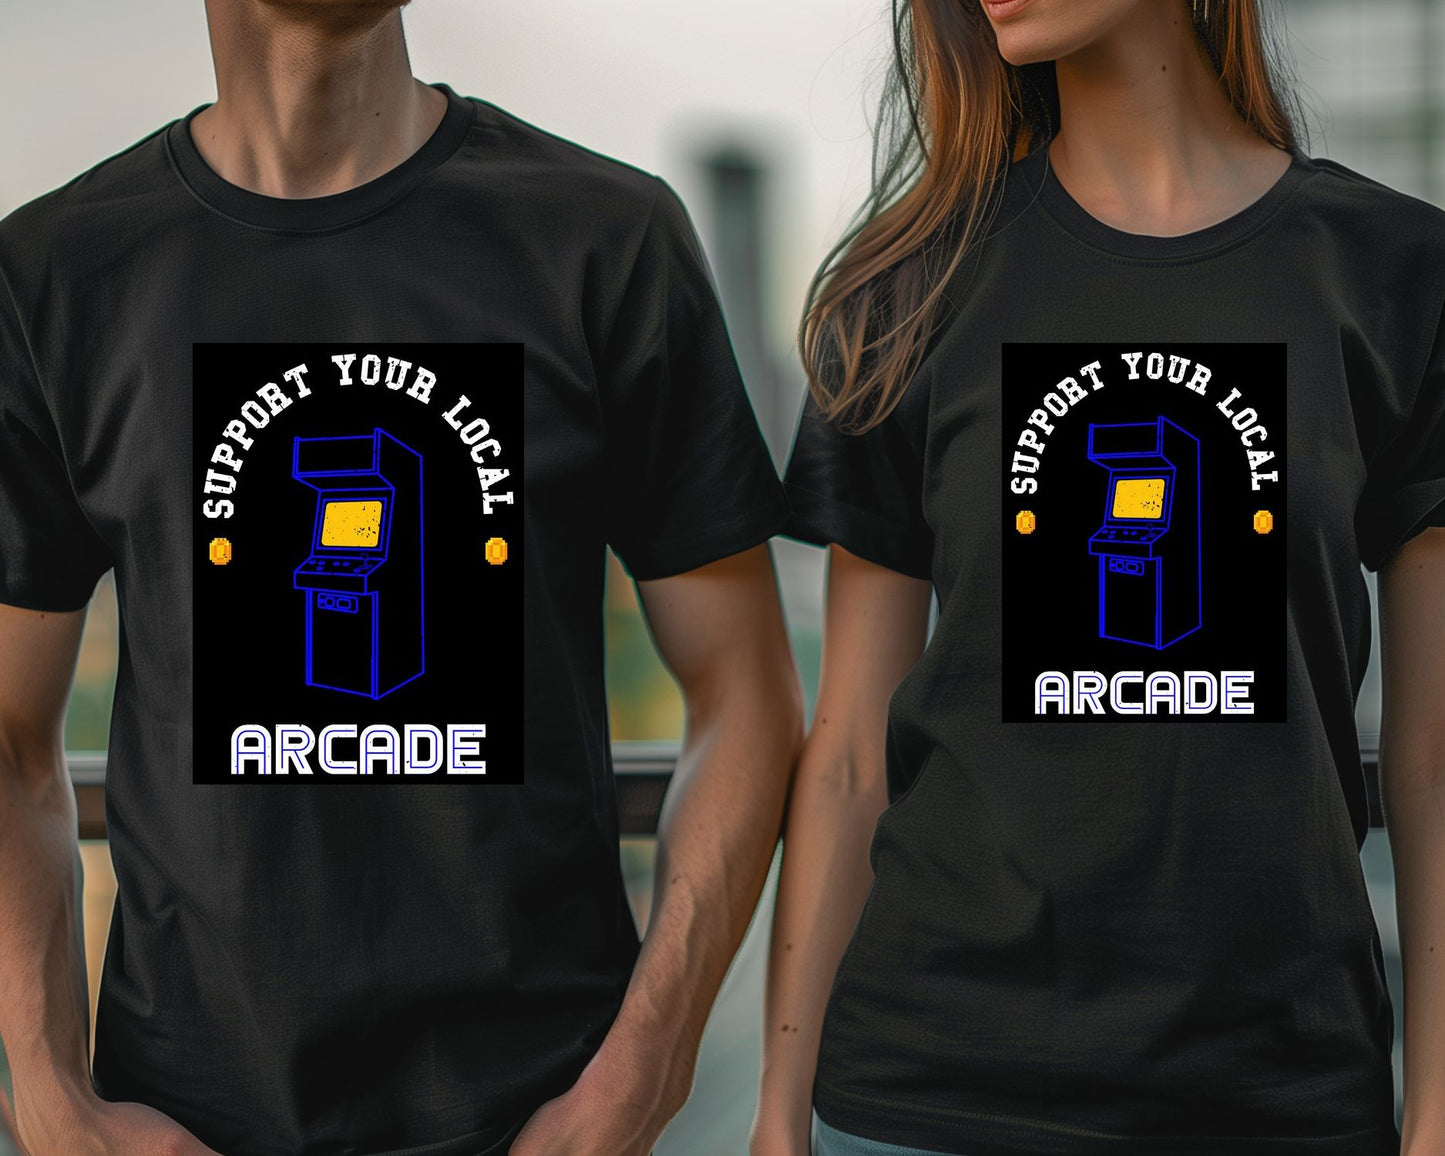 Support your local Arcade - @PowerUpPrints